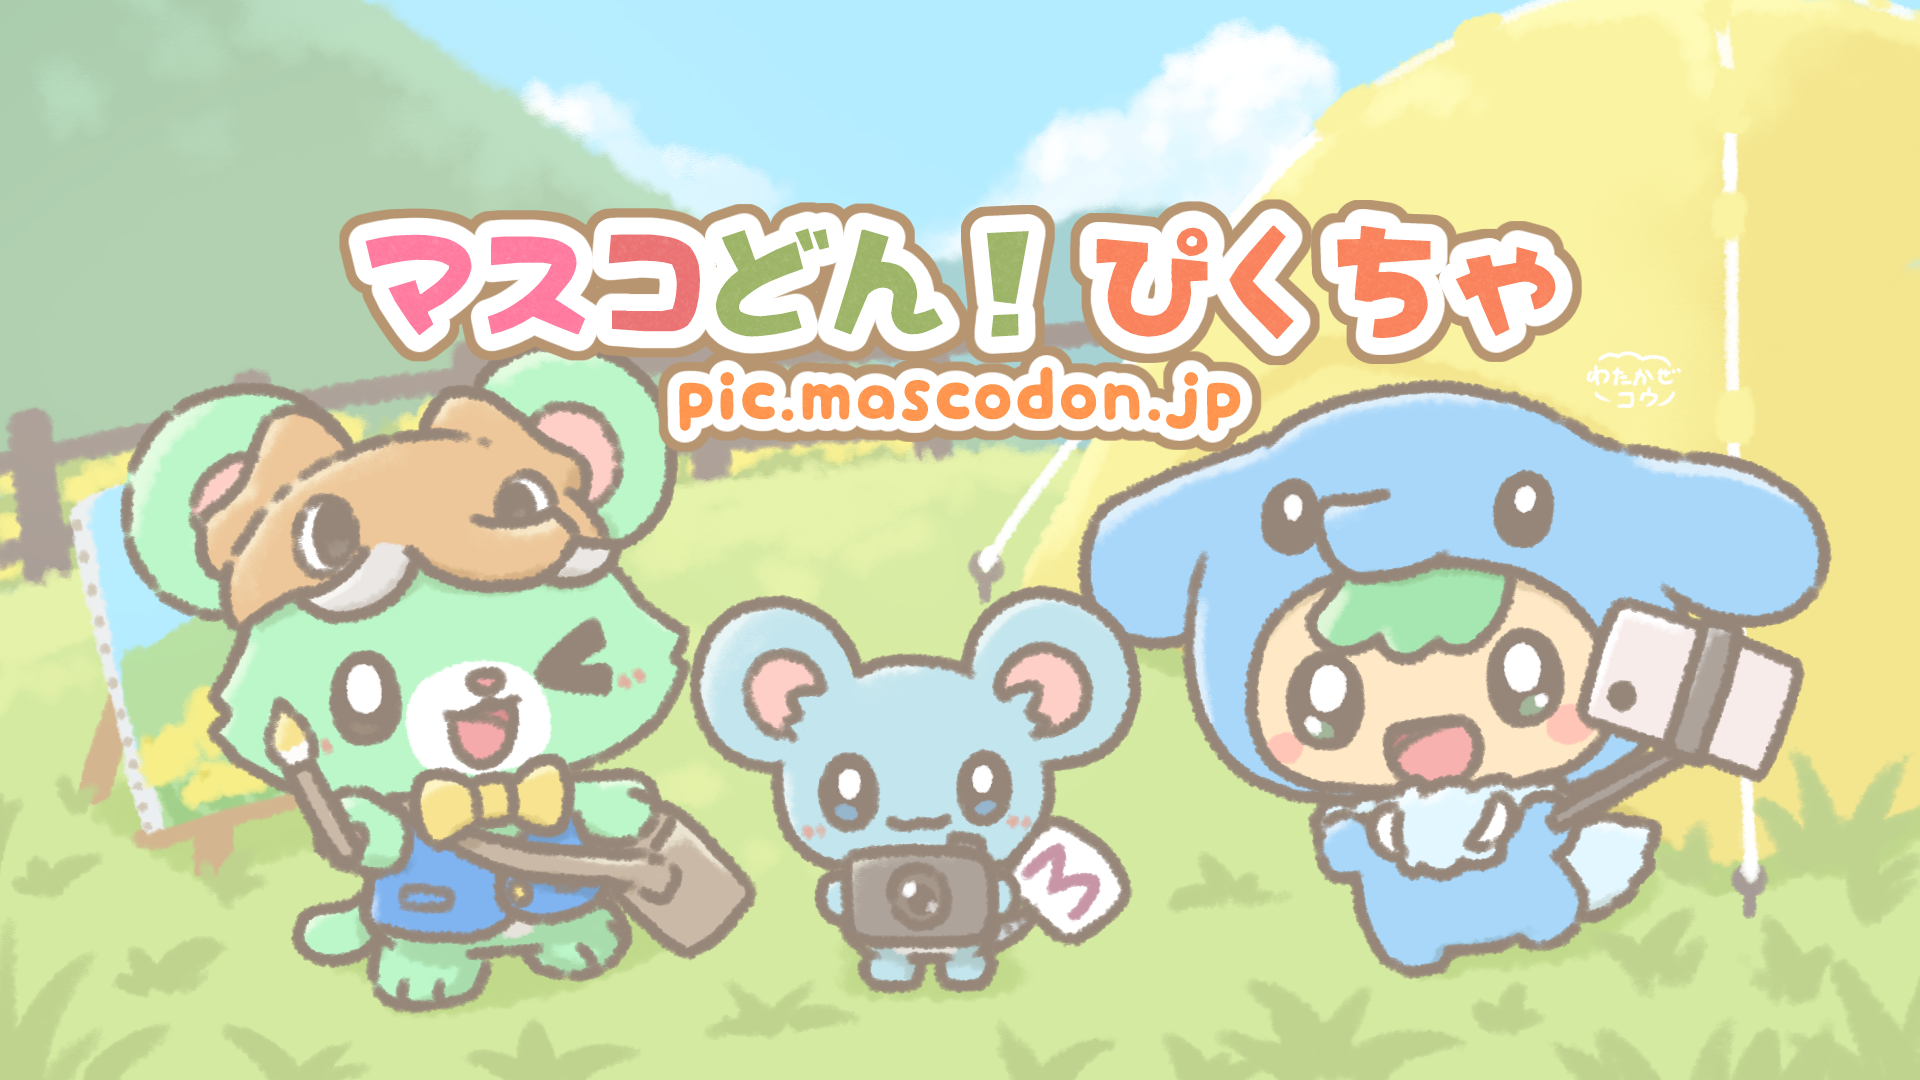 Icon for pic.mascodon.jp